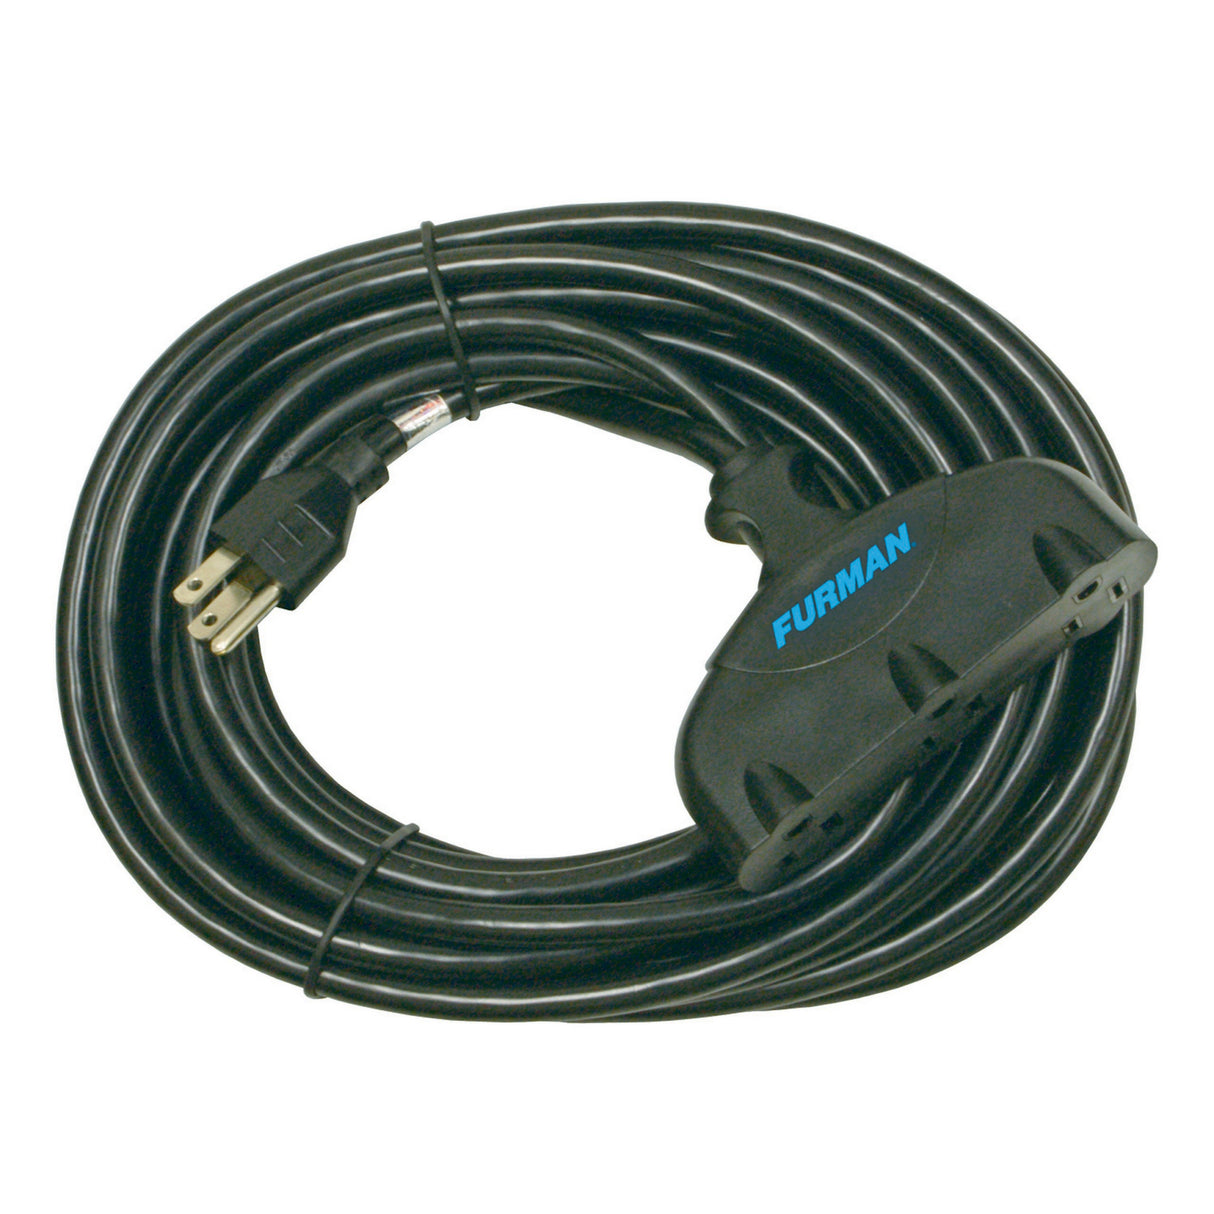 Furman ACX-25 25 Foot Extension Cord